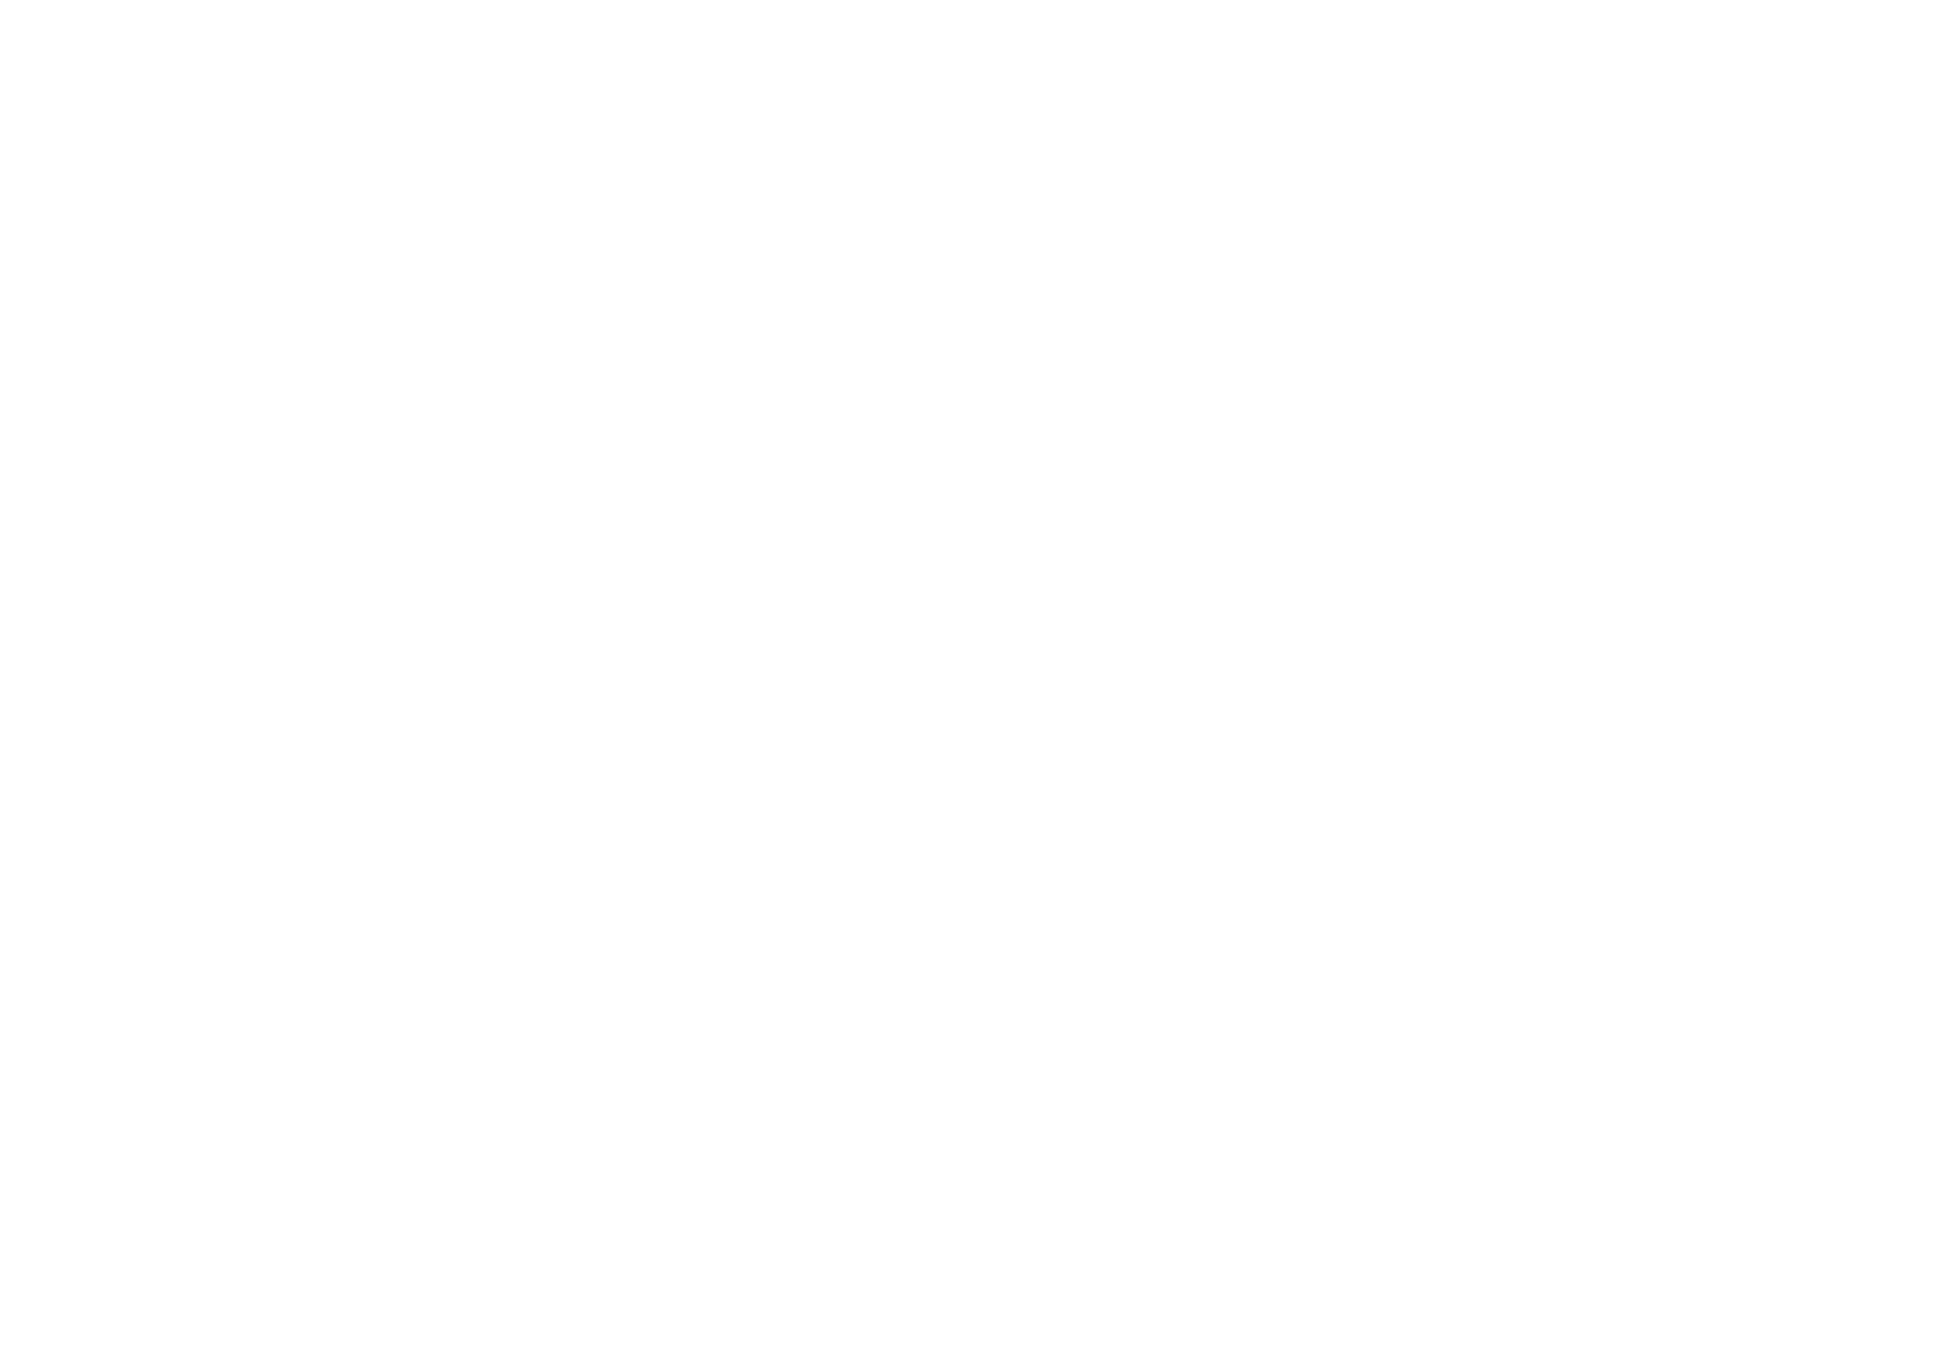 Grid of Small White Dots